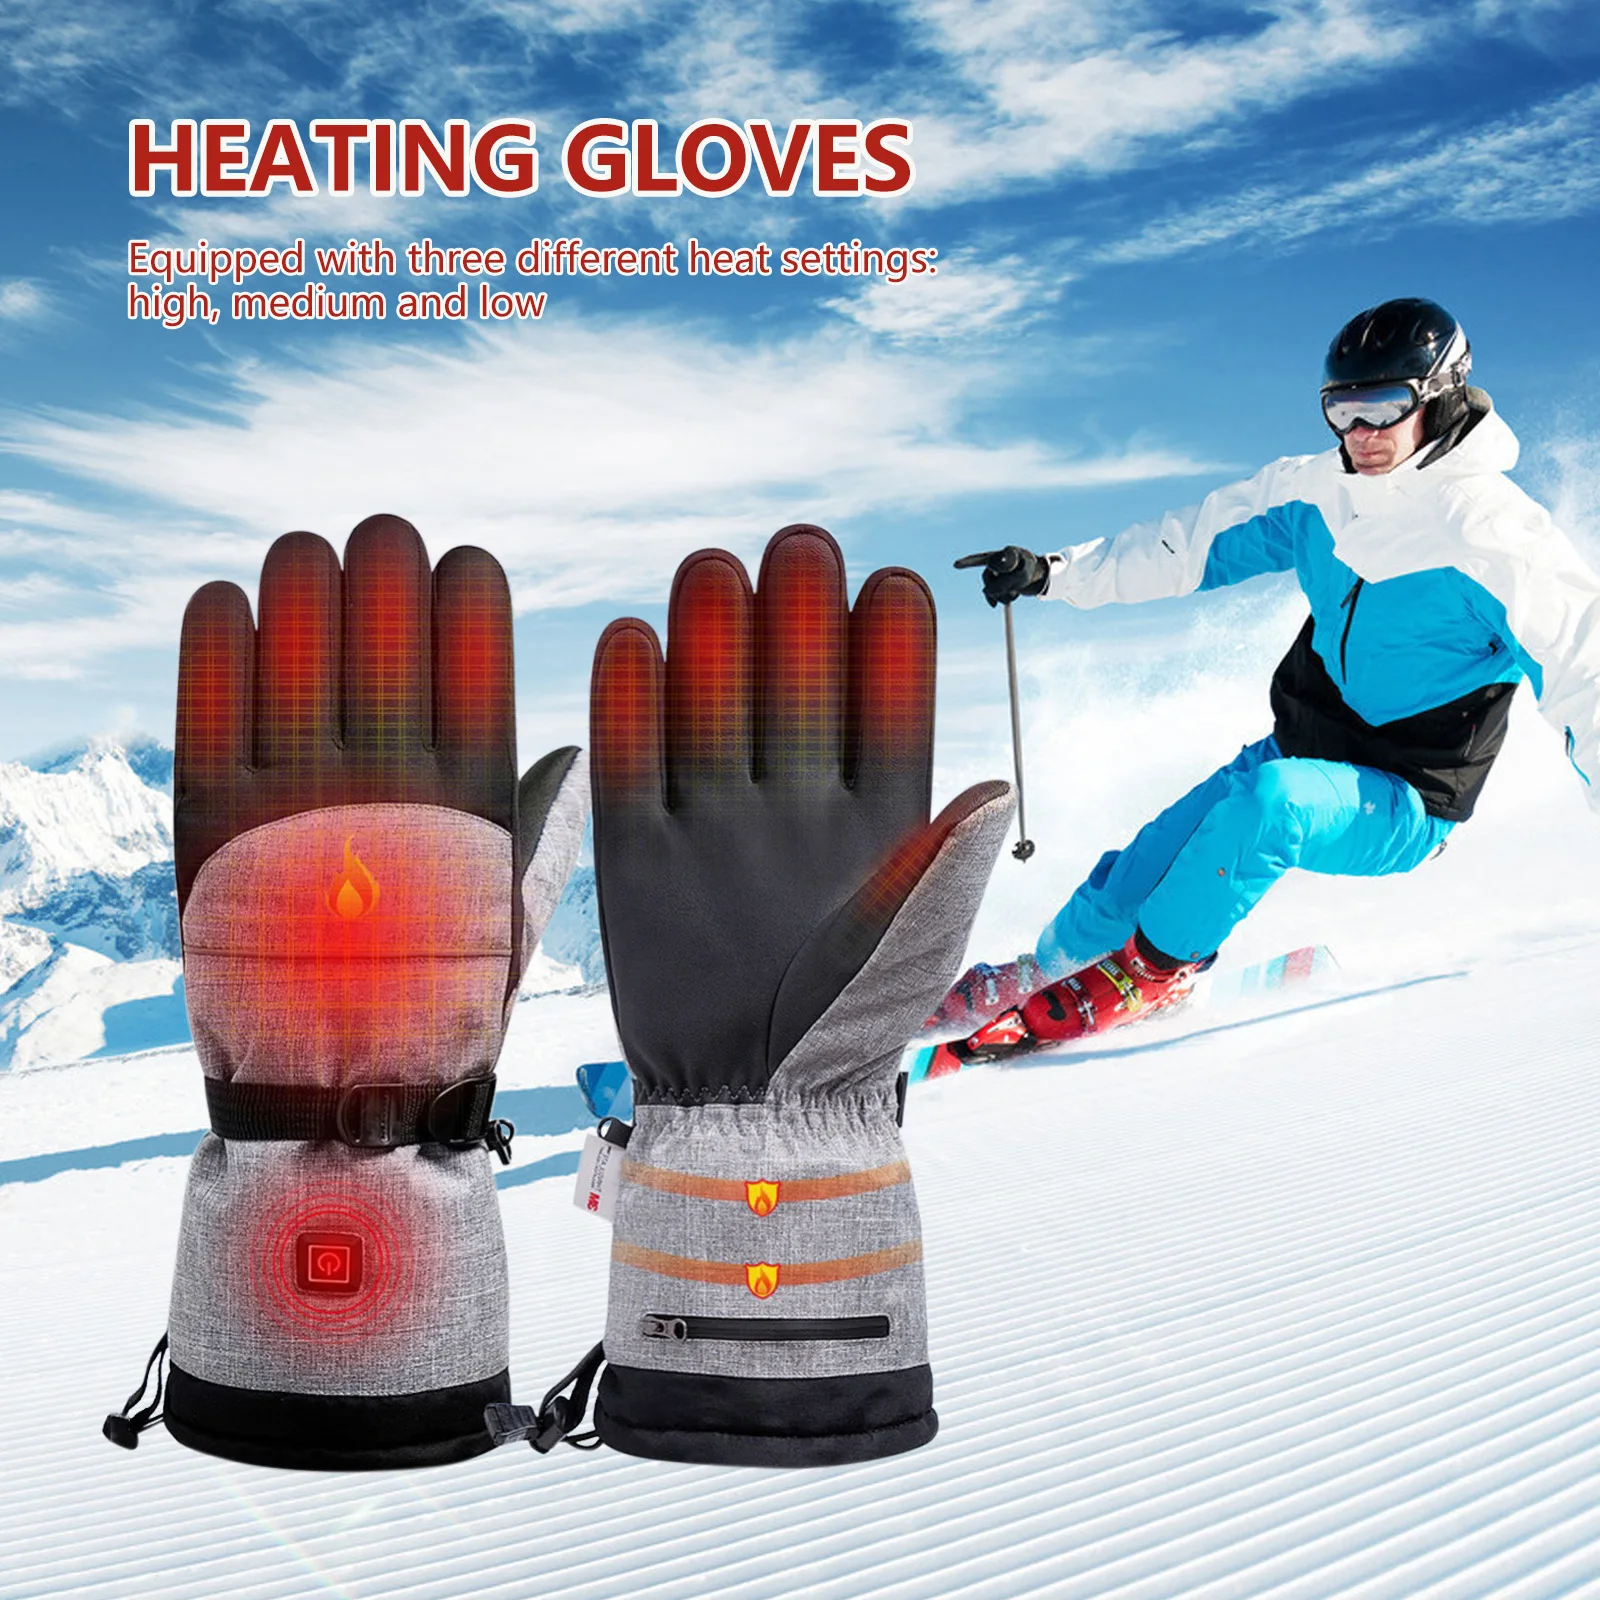 

Electric Heated Gloves Waterproof Winter Thermal Gloves 3 Heating Mode Adjustable Hot Hand Warmers Skiing Skating Cycling Tools